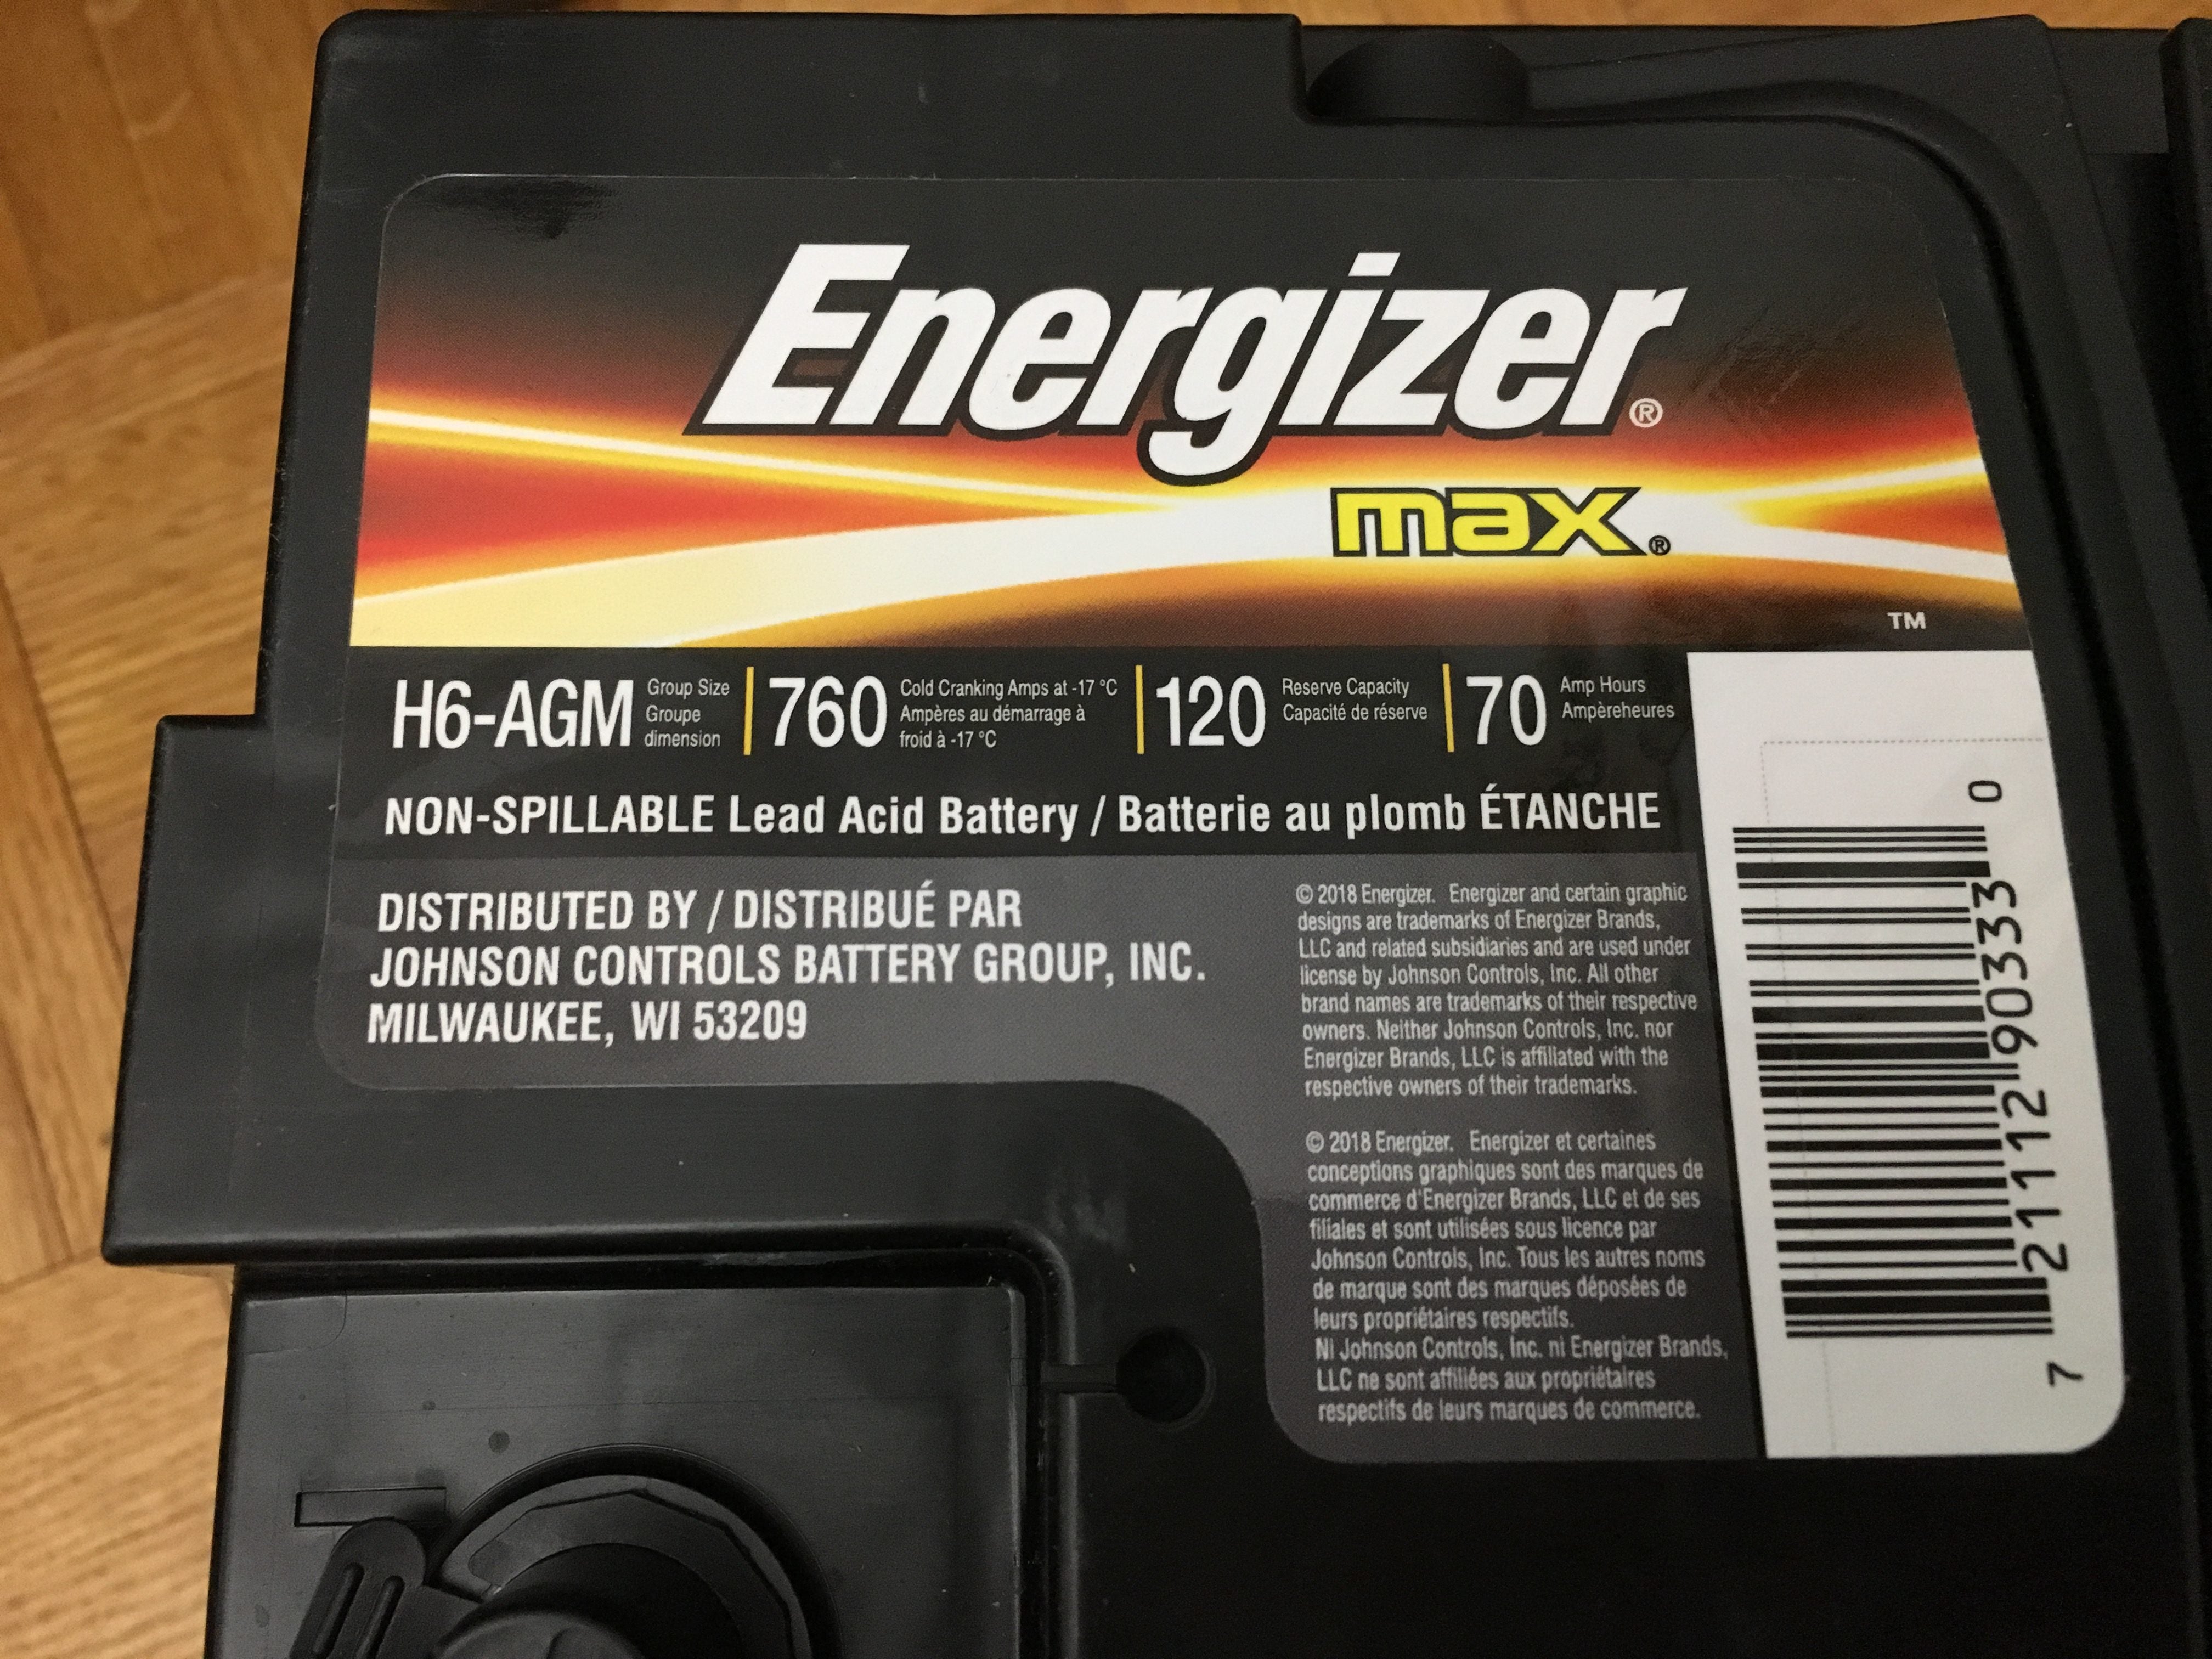 costco battery prices for cars